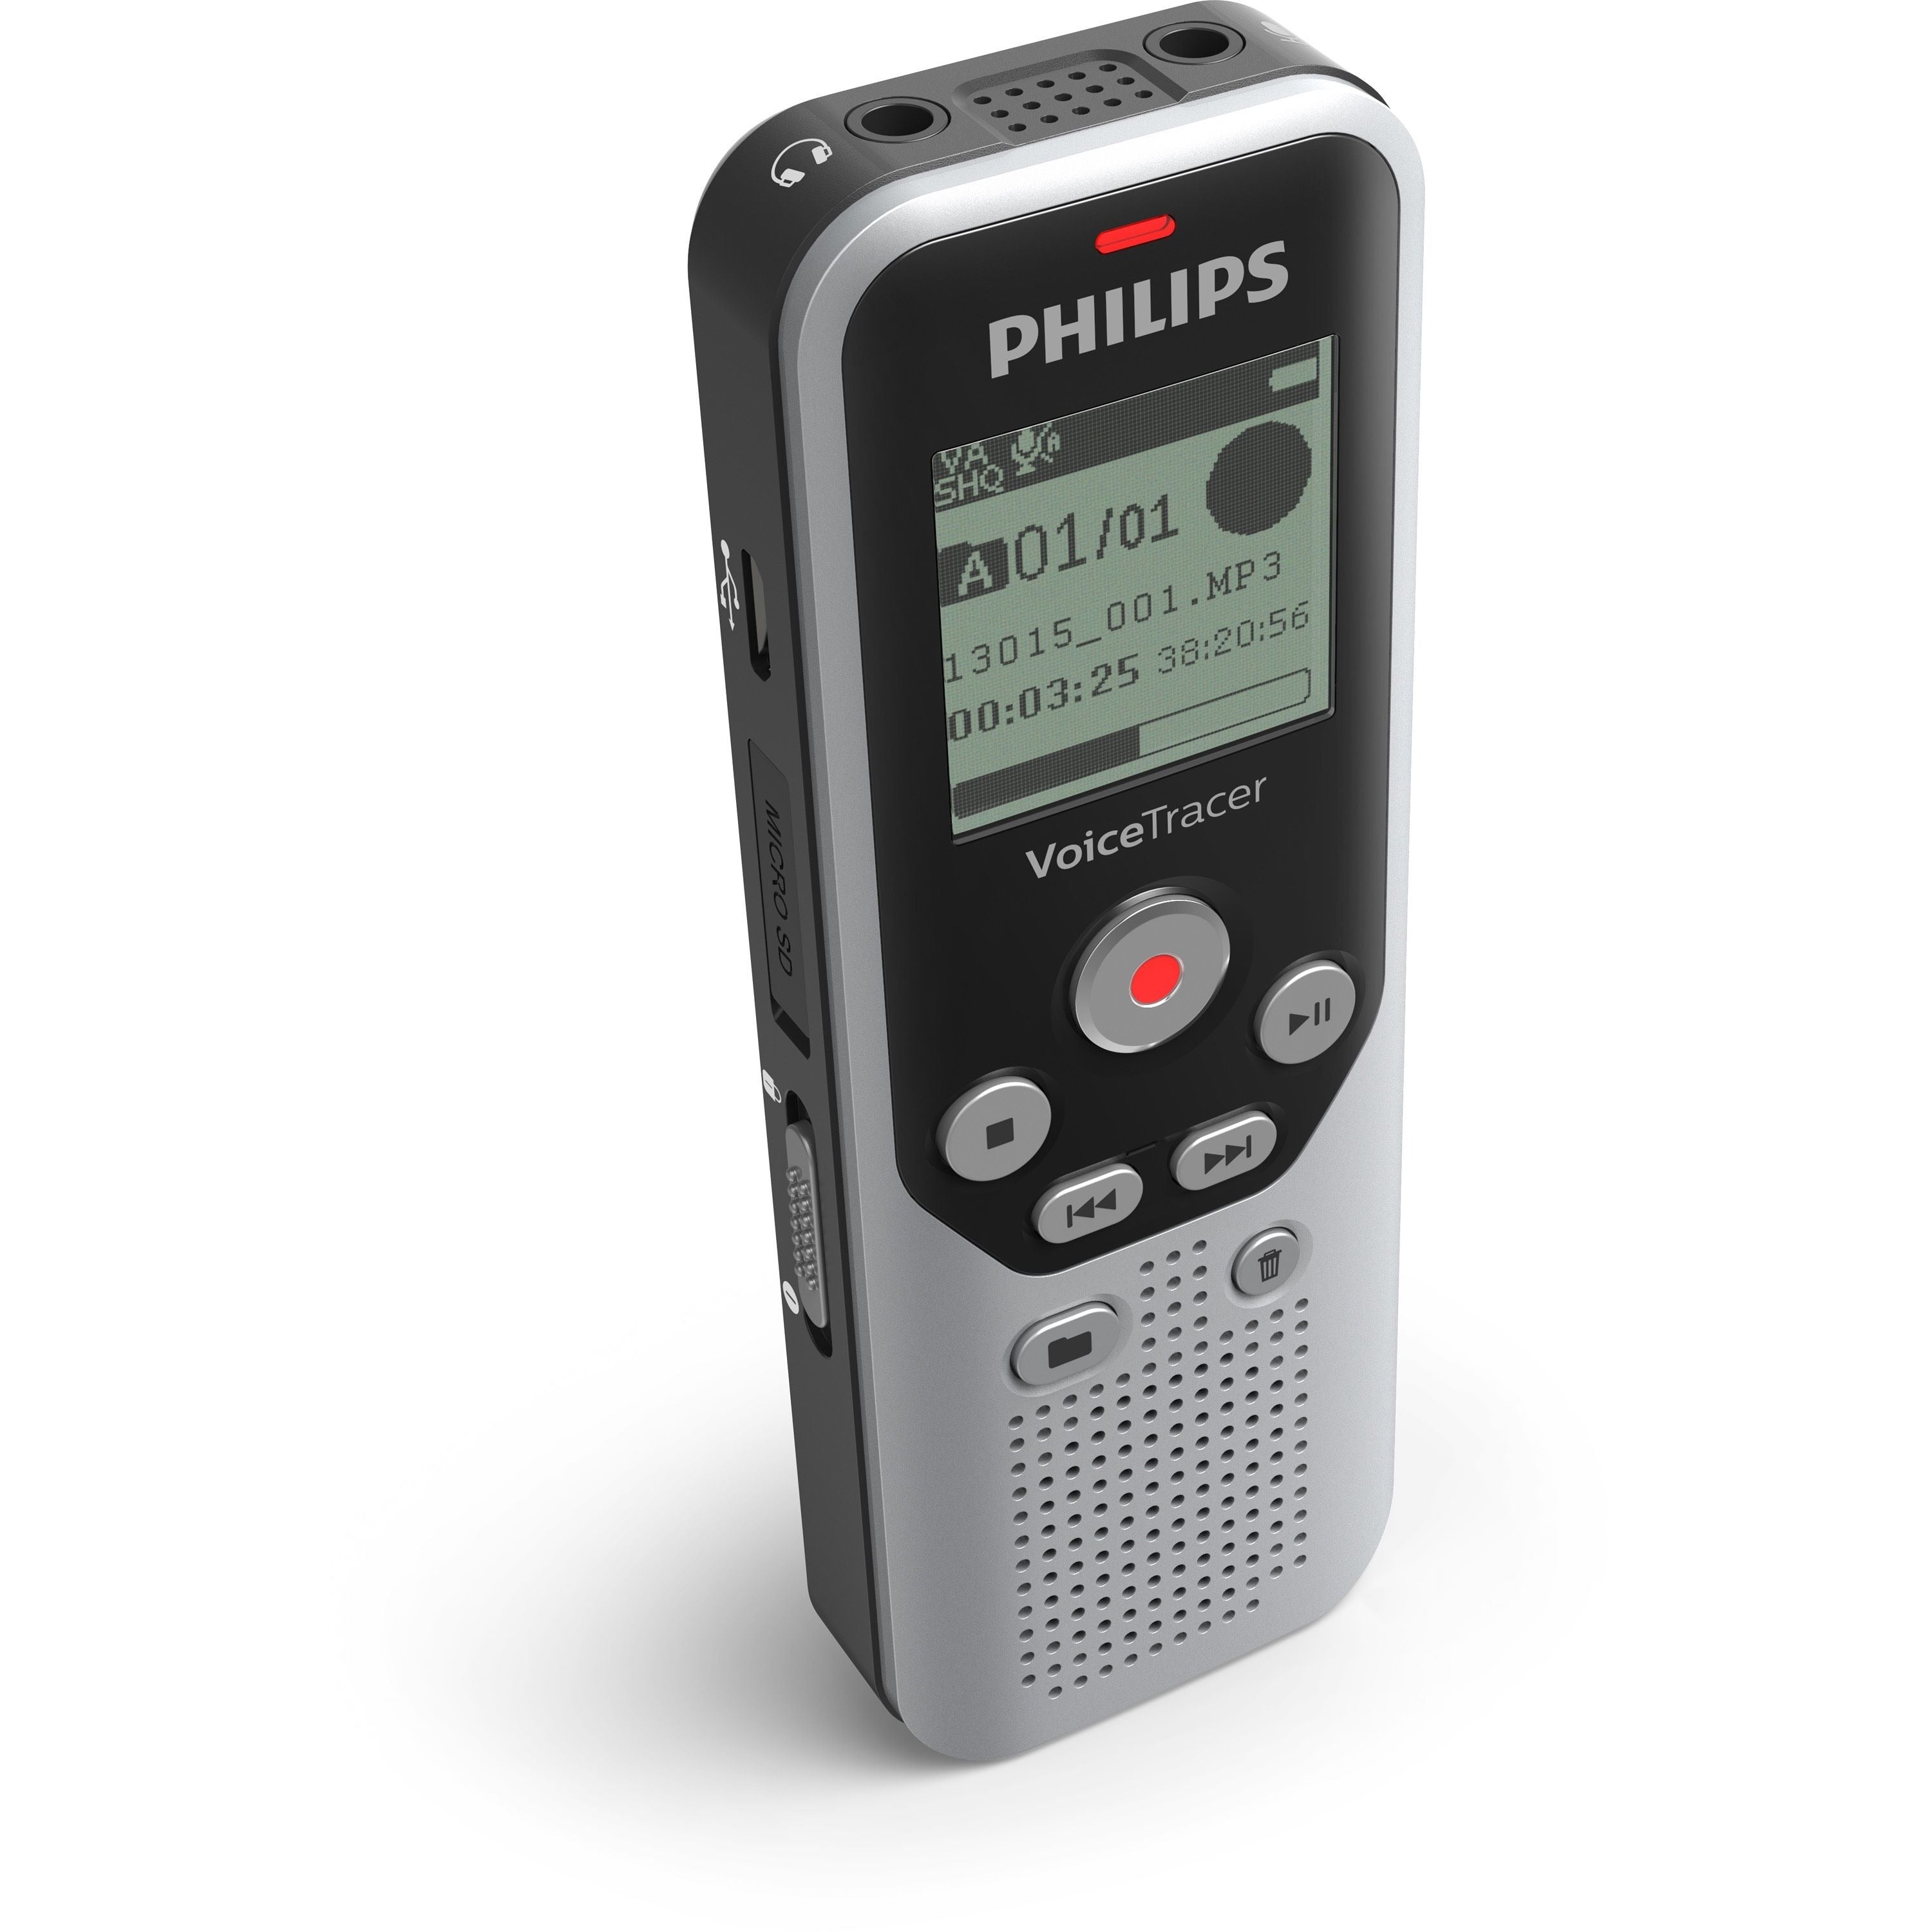 philips-voice-tracer-audio-recorder-dvt1250-8-gbmicrosd-sd-supported-13-lcd-wav-headphone-583-hourspeacerecording-time-portable_pspdvt1250 - 4